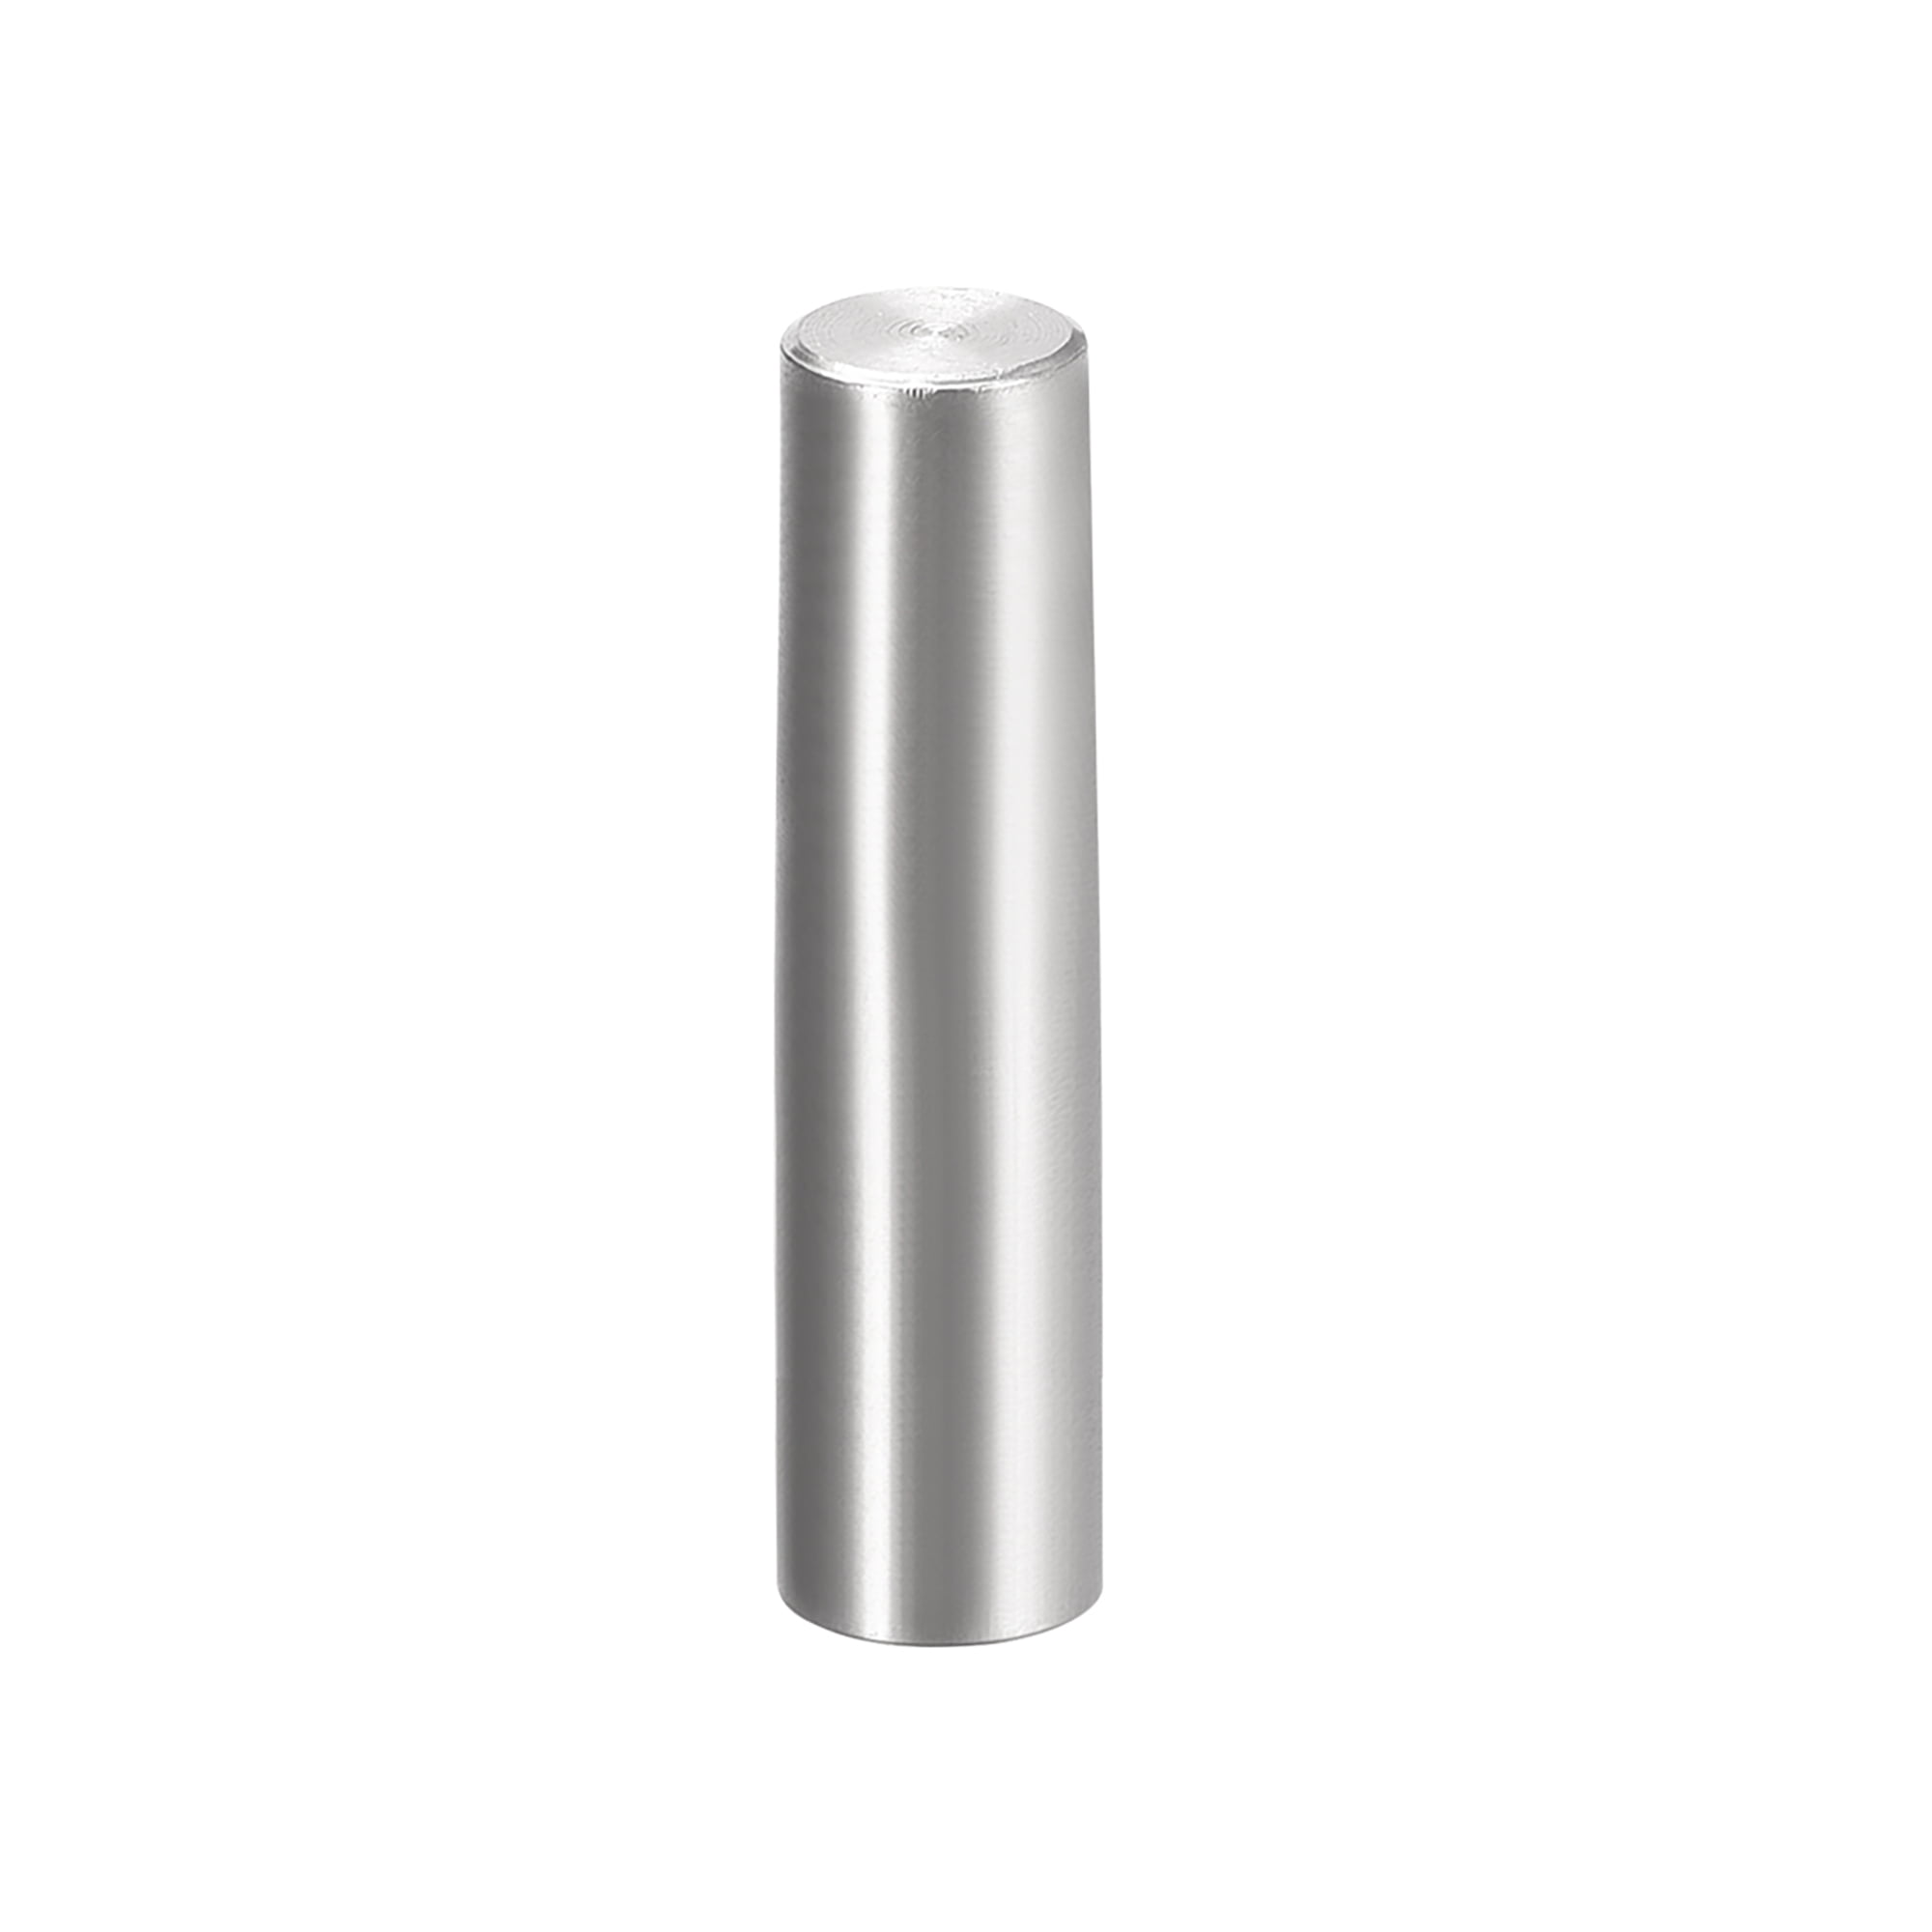 Details about  / 8mm x 35mm 1:50 Taper Pin 304 Stainless Steel Shelf Support Pin Fasten Elements